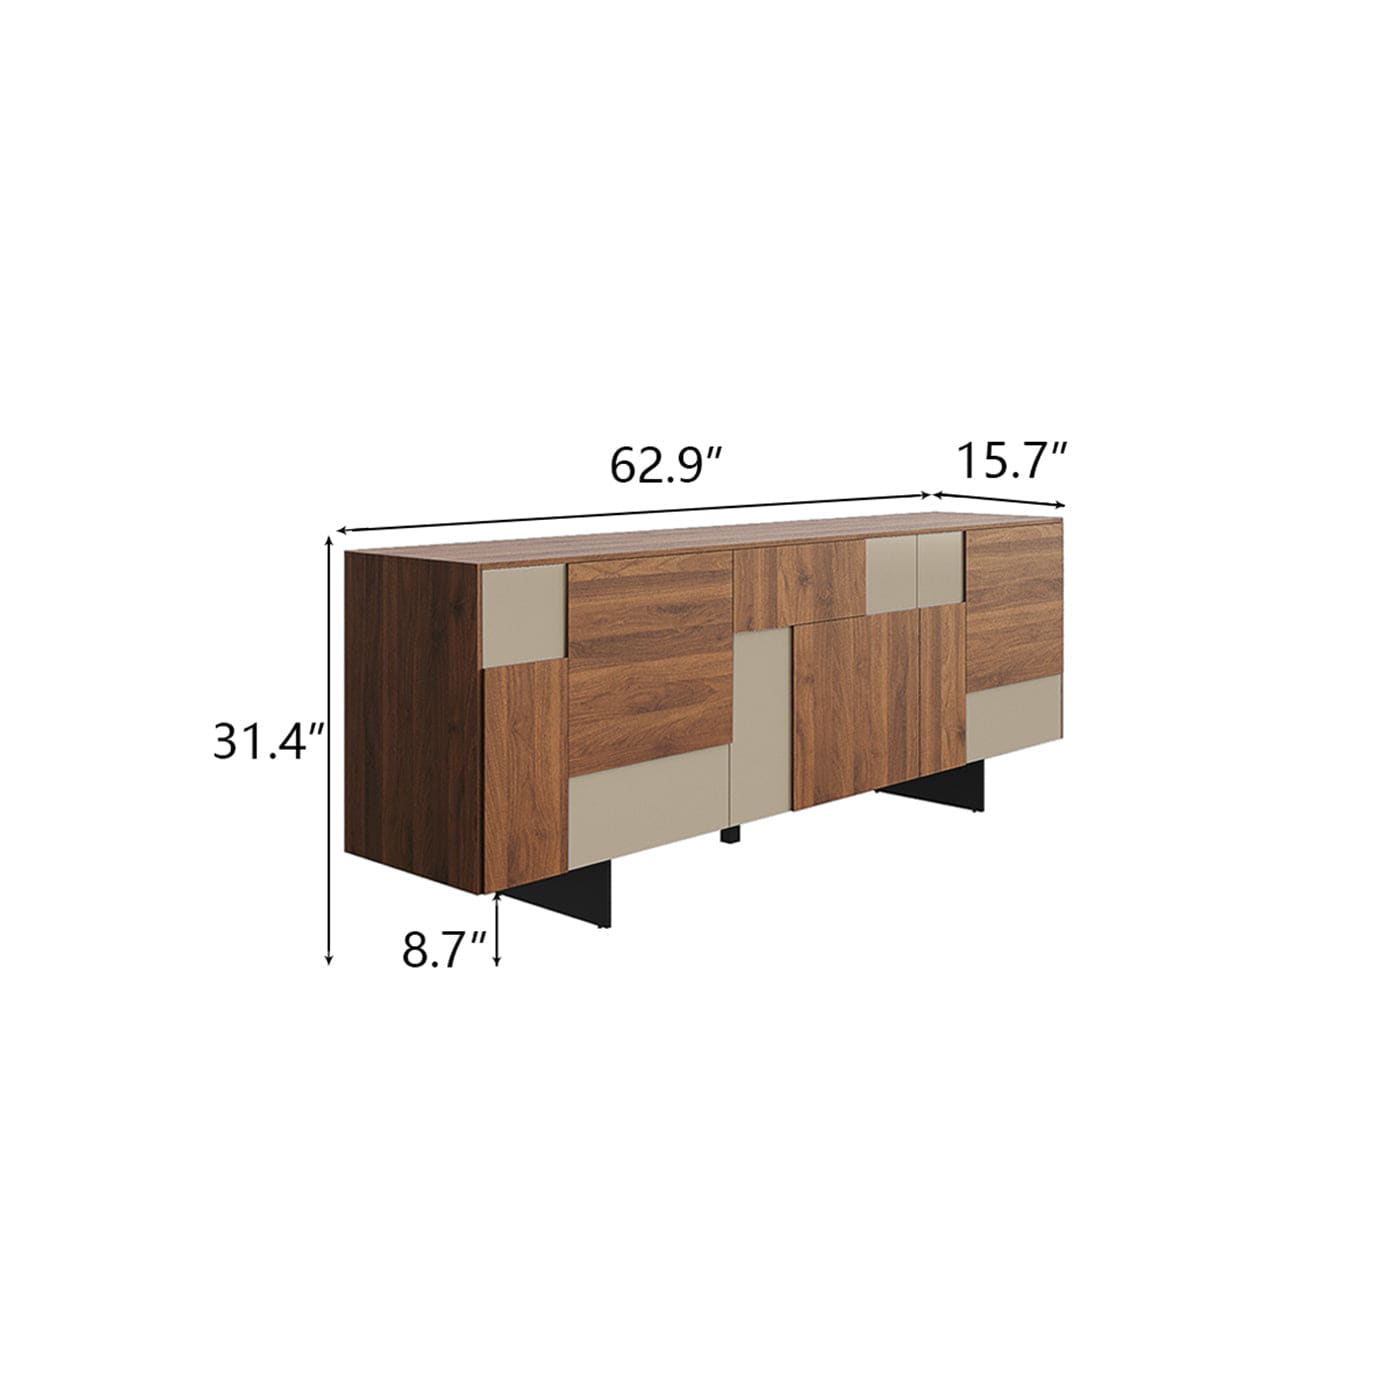 1st Choice Furniture Direct Cabinet Server 1st Choice Two Tone Long Sideboard Buffet Veneer Cabinet in Walnut